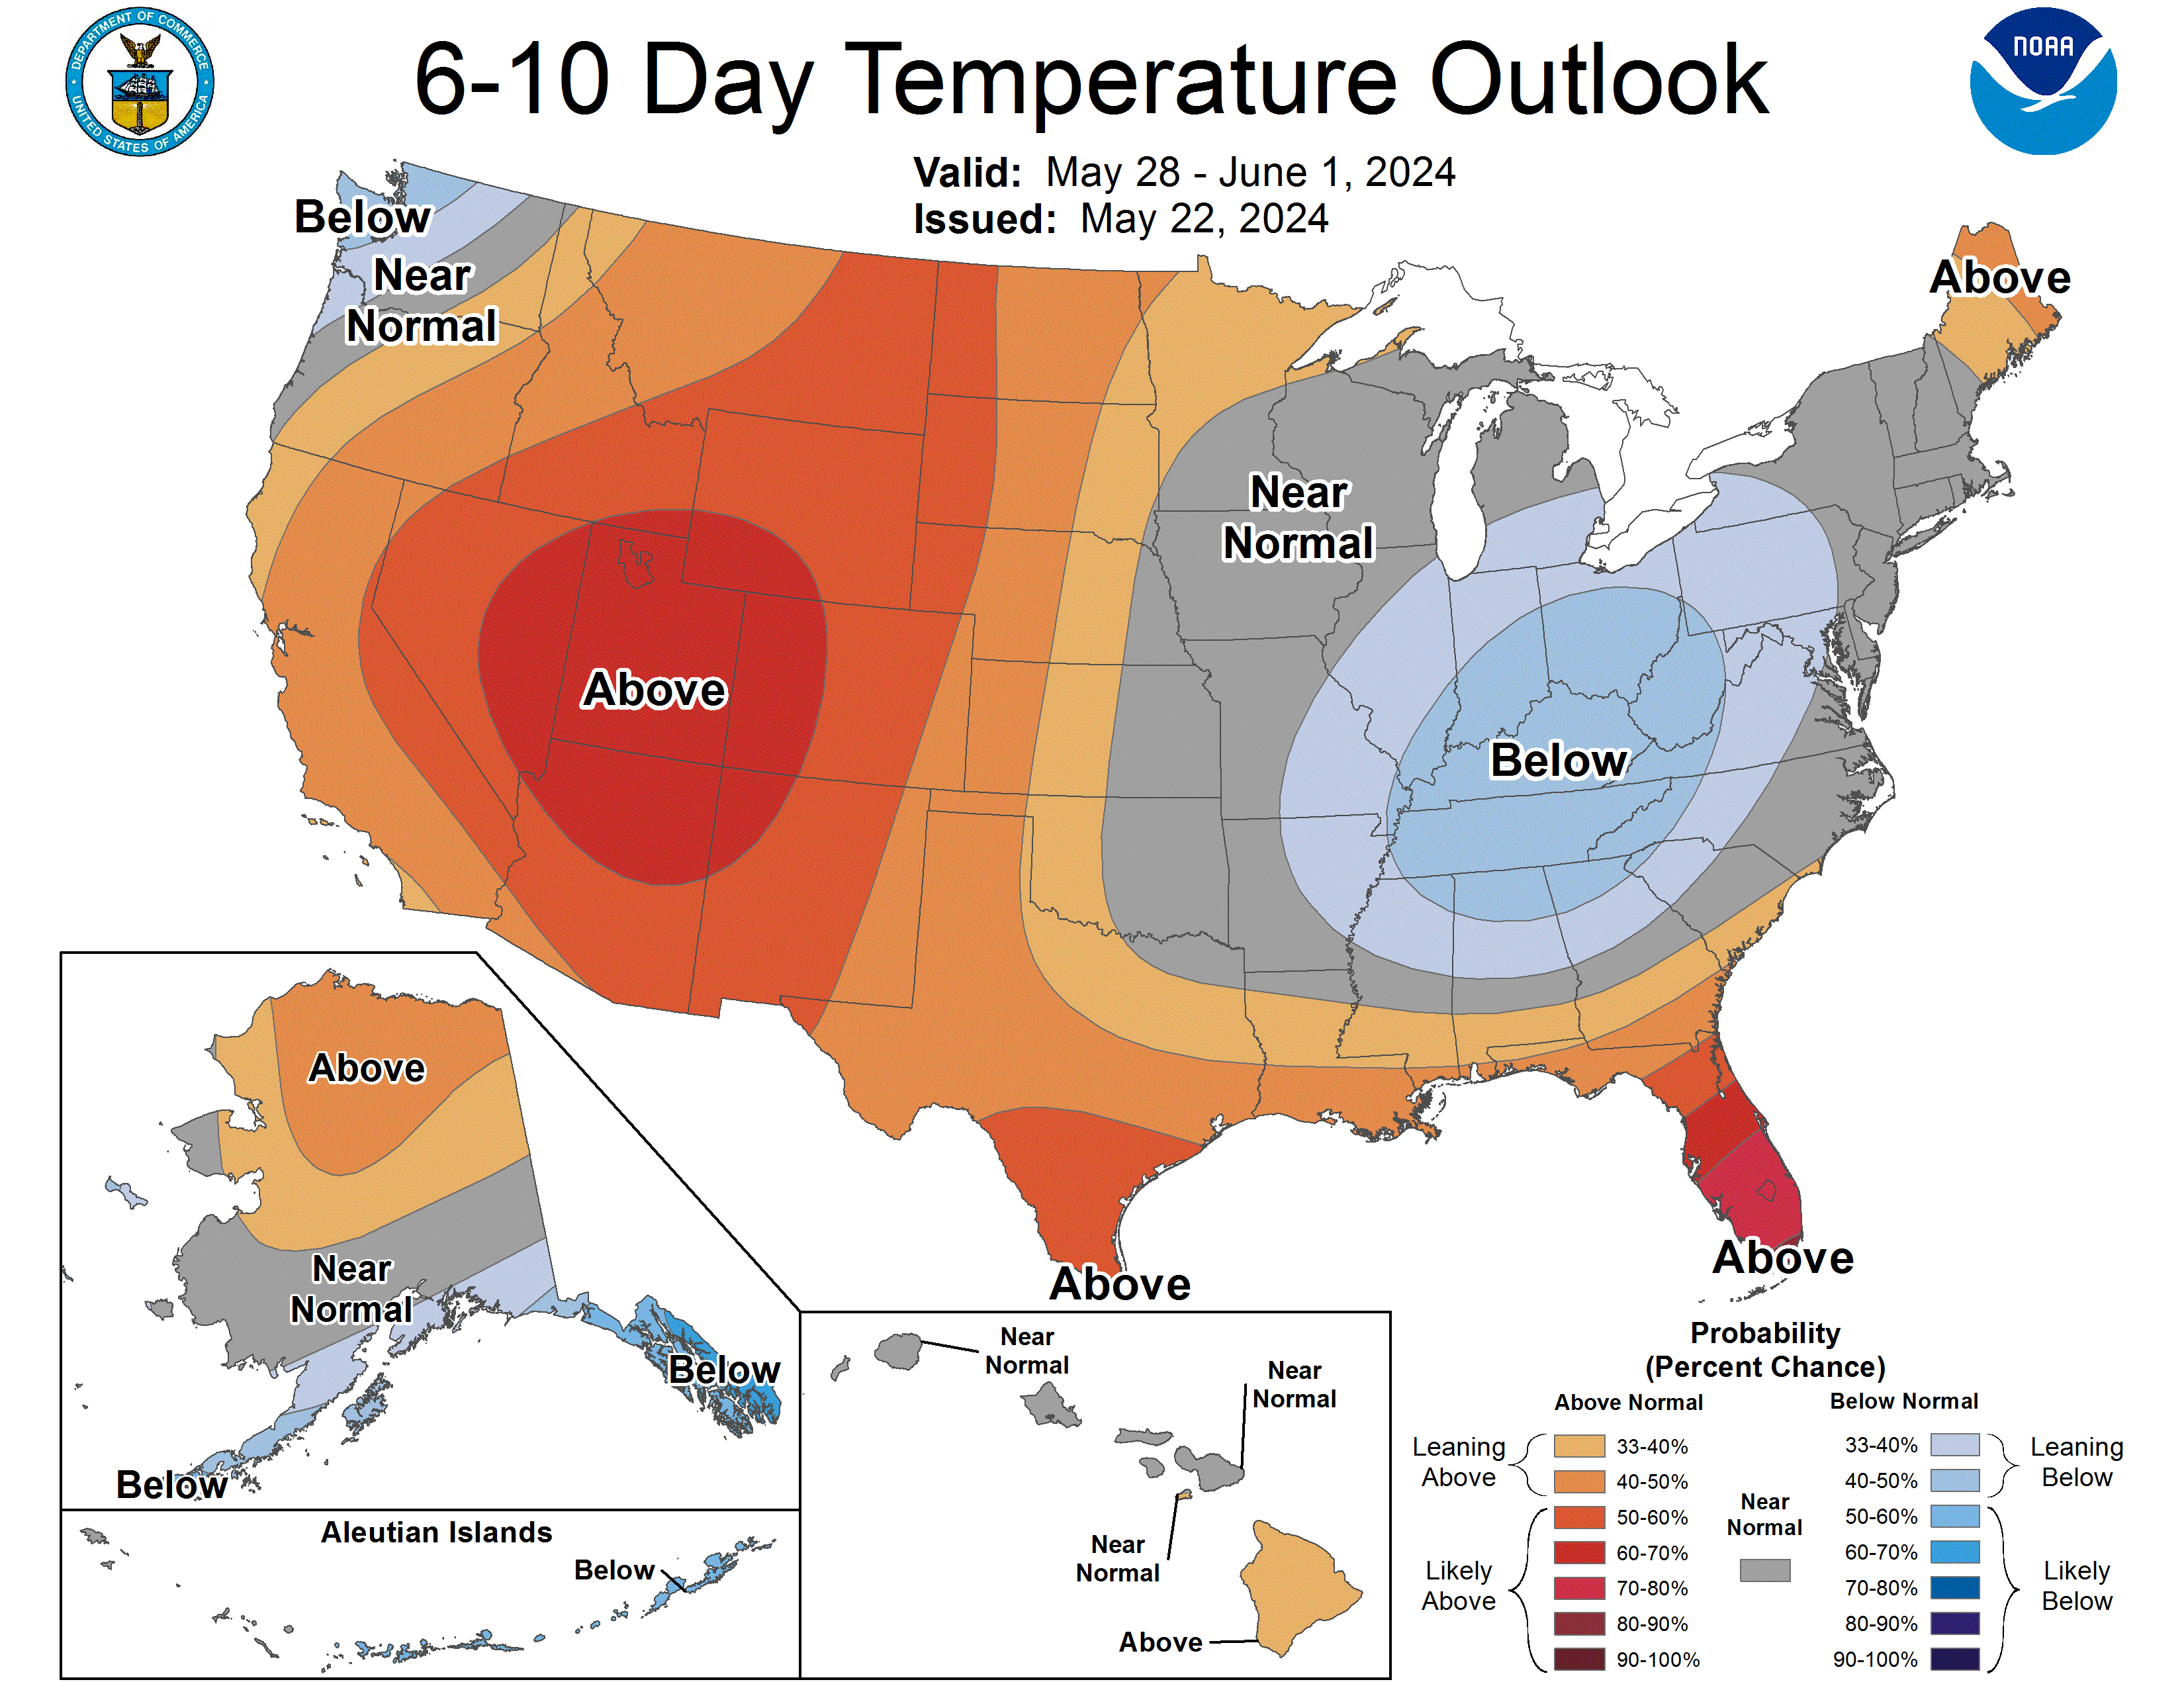 http://www.cpc.ncep.noaa.gov/products/predictions/6-10_day/610temp.new.gif